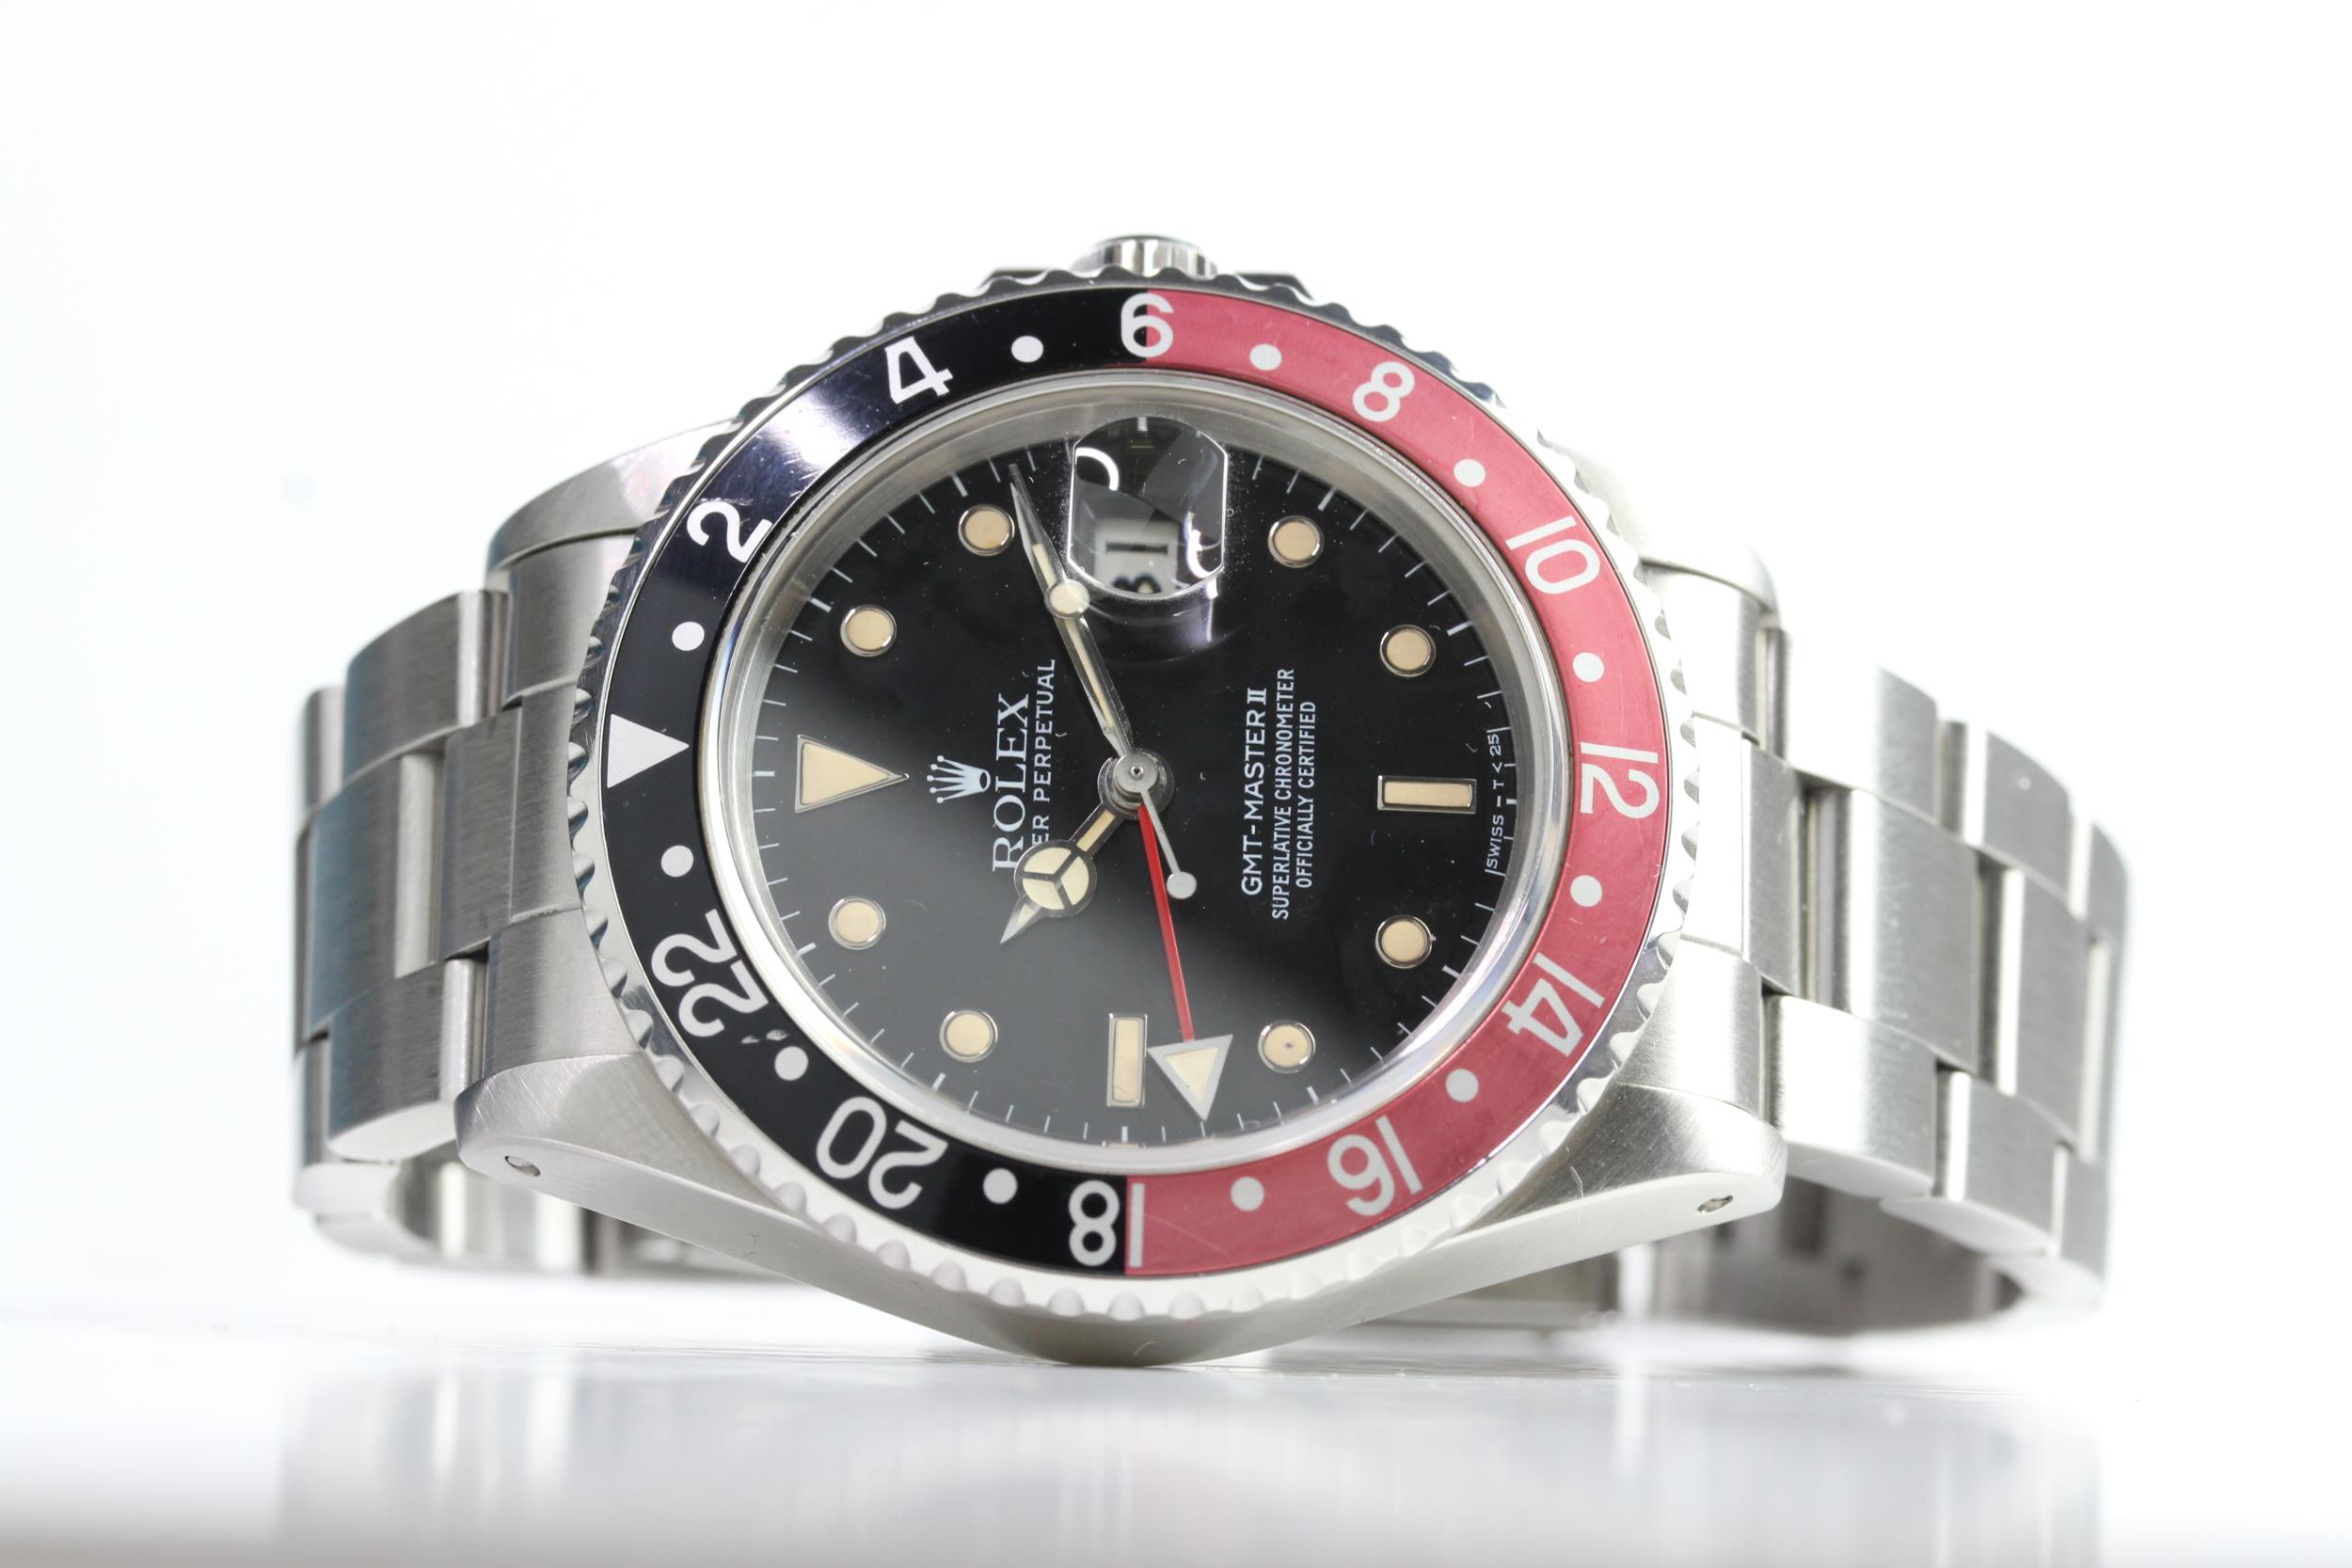 RARE ROLEX GMT MASTER II 'FAT LADY' NON DATE DIAL REFERENCE 16760 CIRCA 1984 - Image 3 of 11